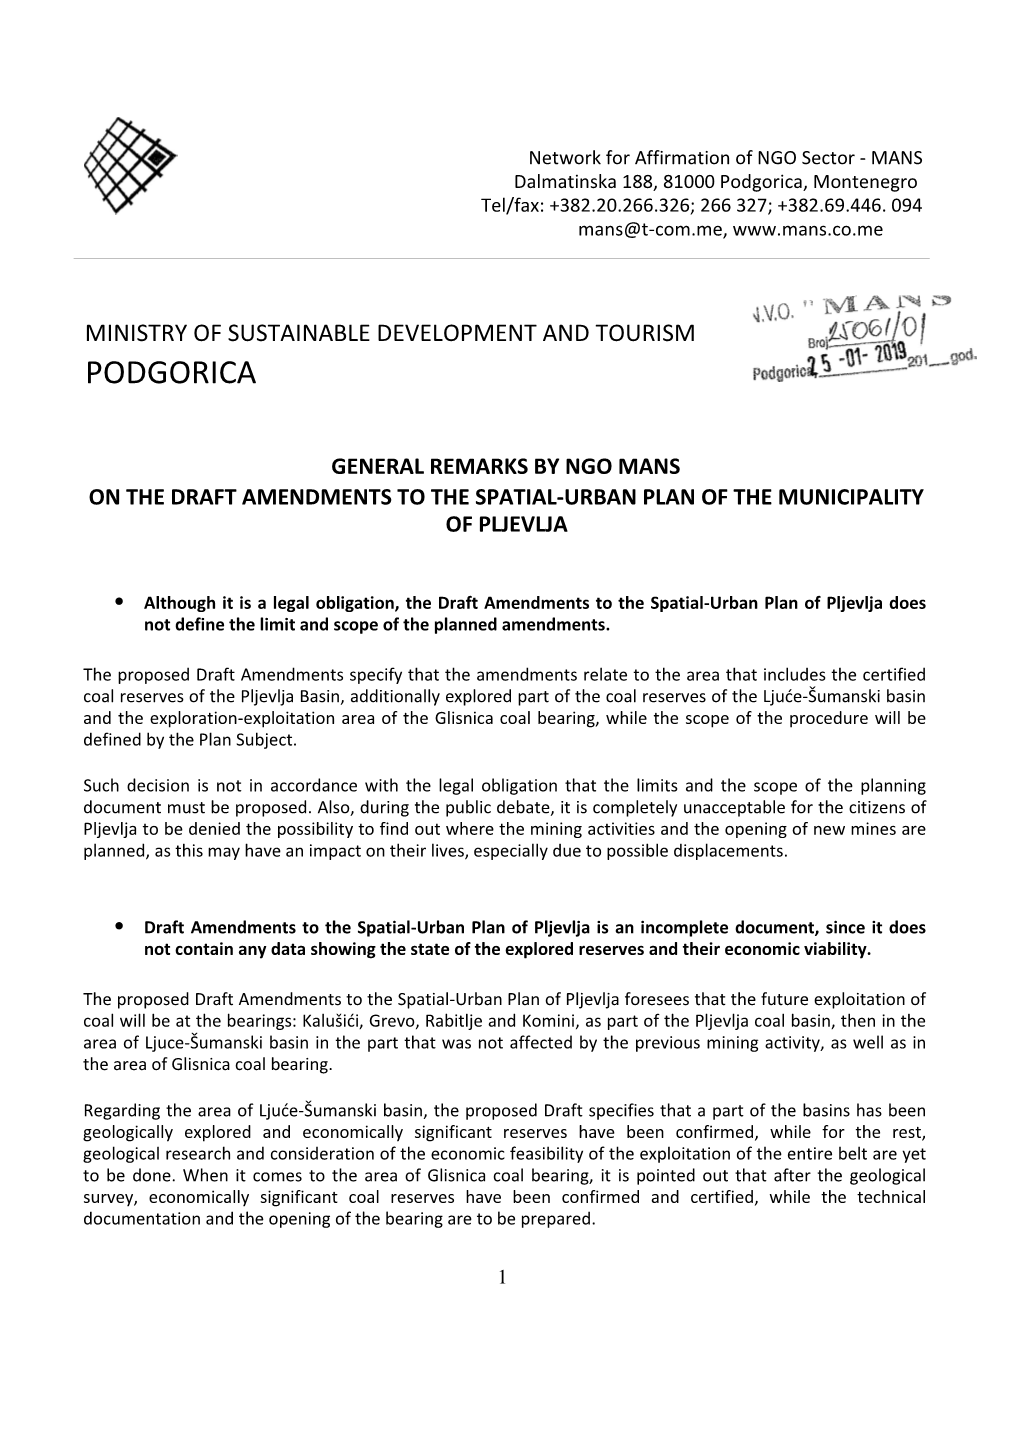 Comments on the Draft Amendments SUP of the Municipality of Pljevlja